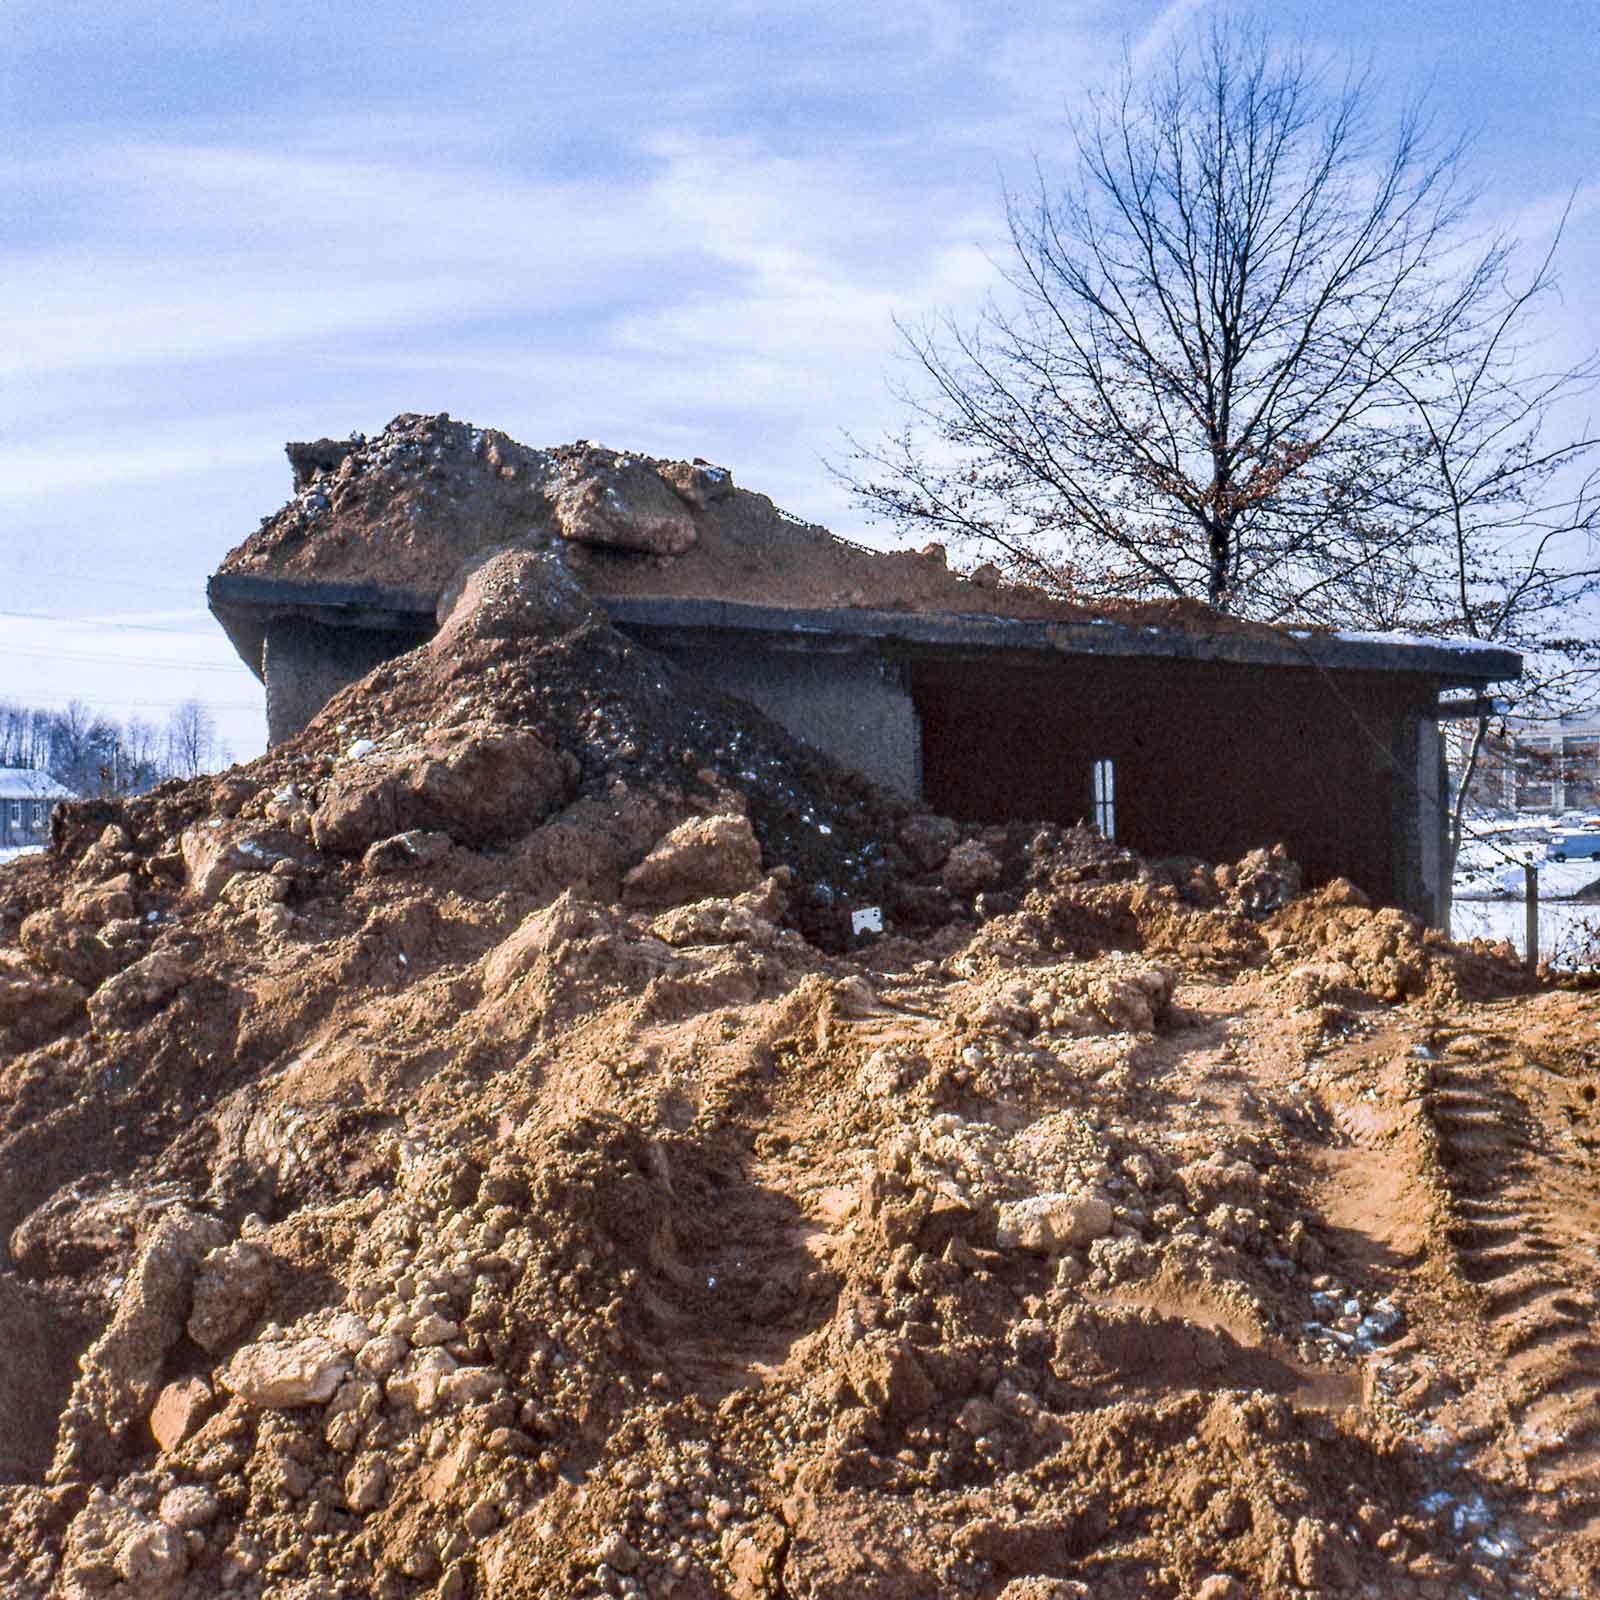 A 1970 work by Robert Smithson. Smithson piled earth atop an old woodshed on the campus of Kent State University until the center beam cracked.